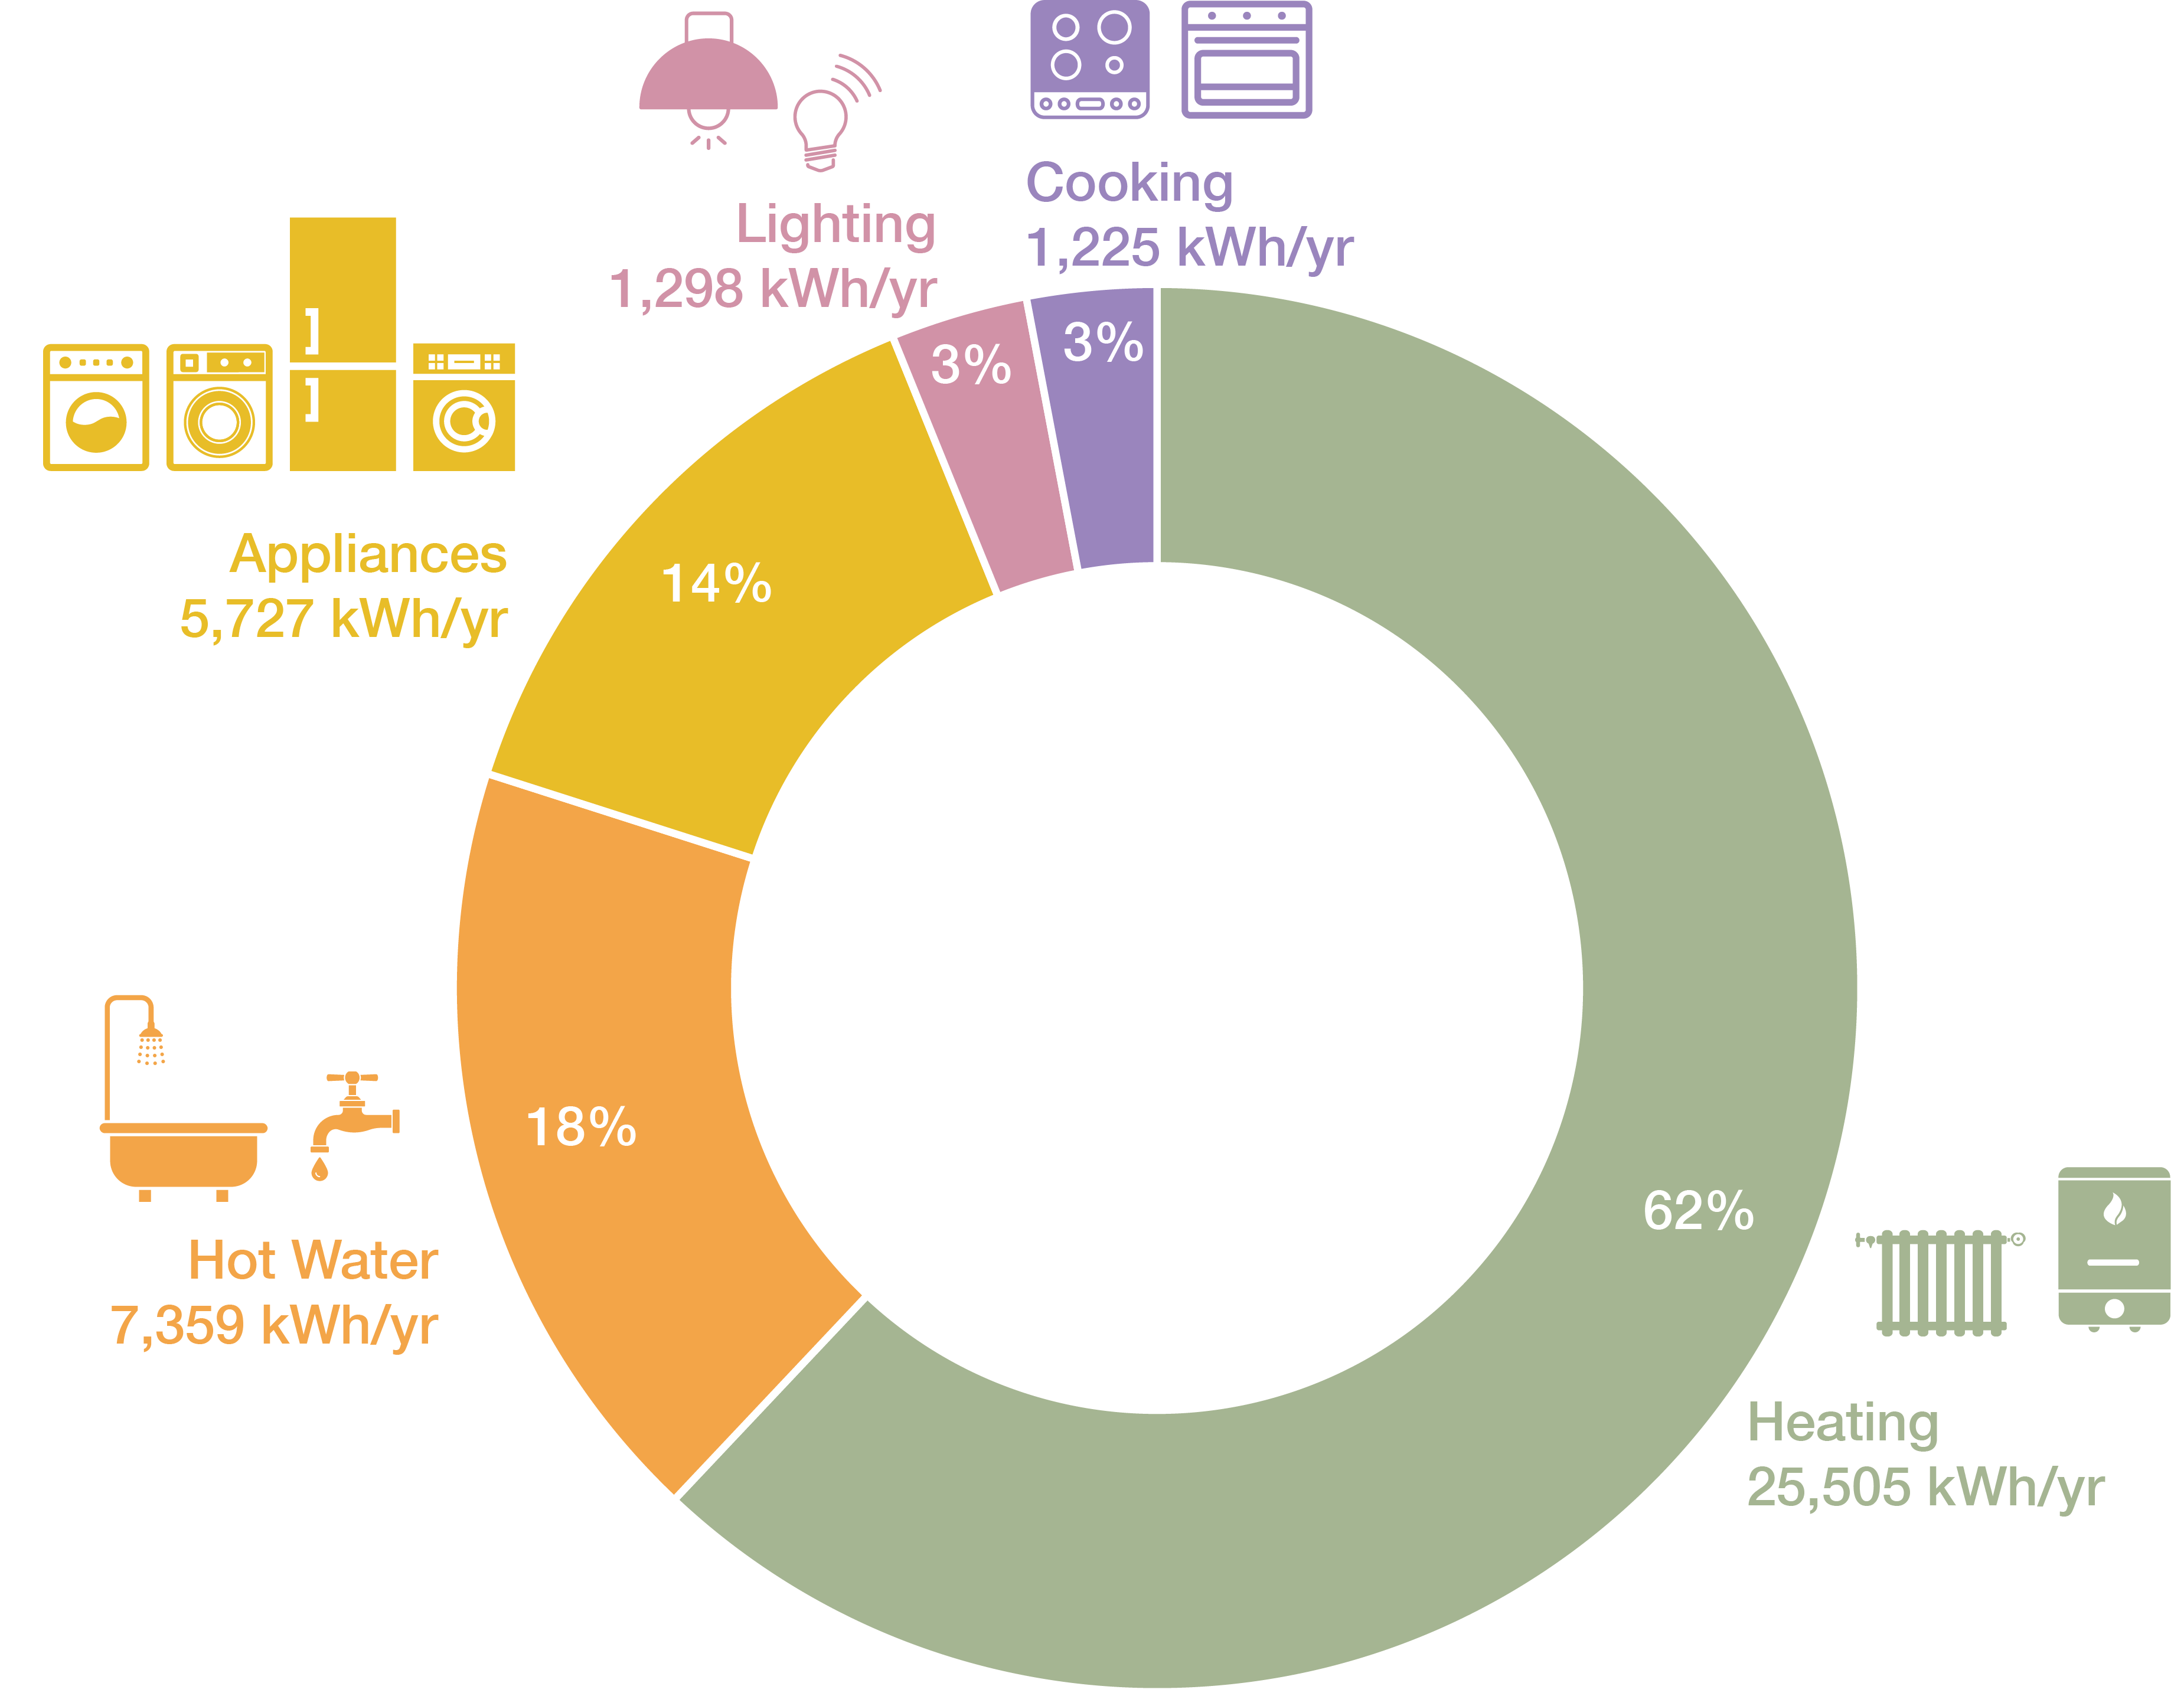 A pie chart showing typical end use data for a UK home in 2021. It is broken down into coloured sections showing heating, hot water, appliances, lighting and cooking with corresponding logos.